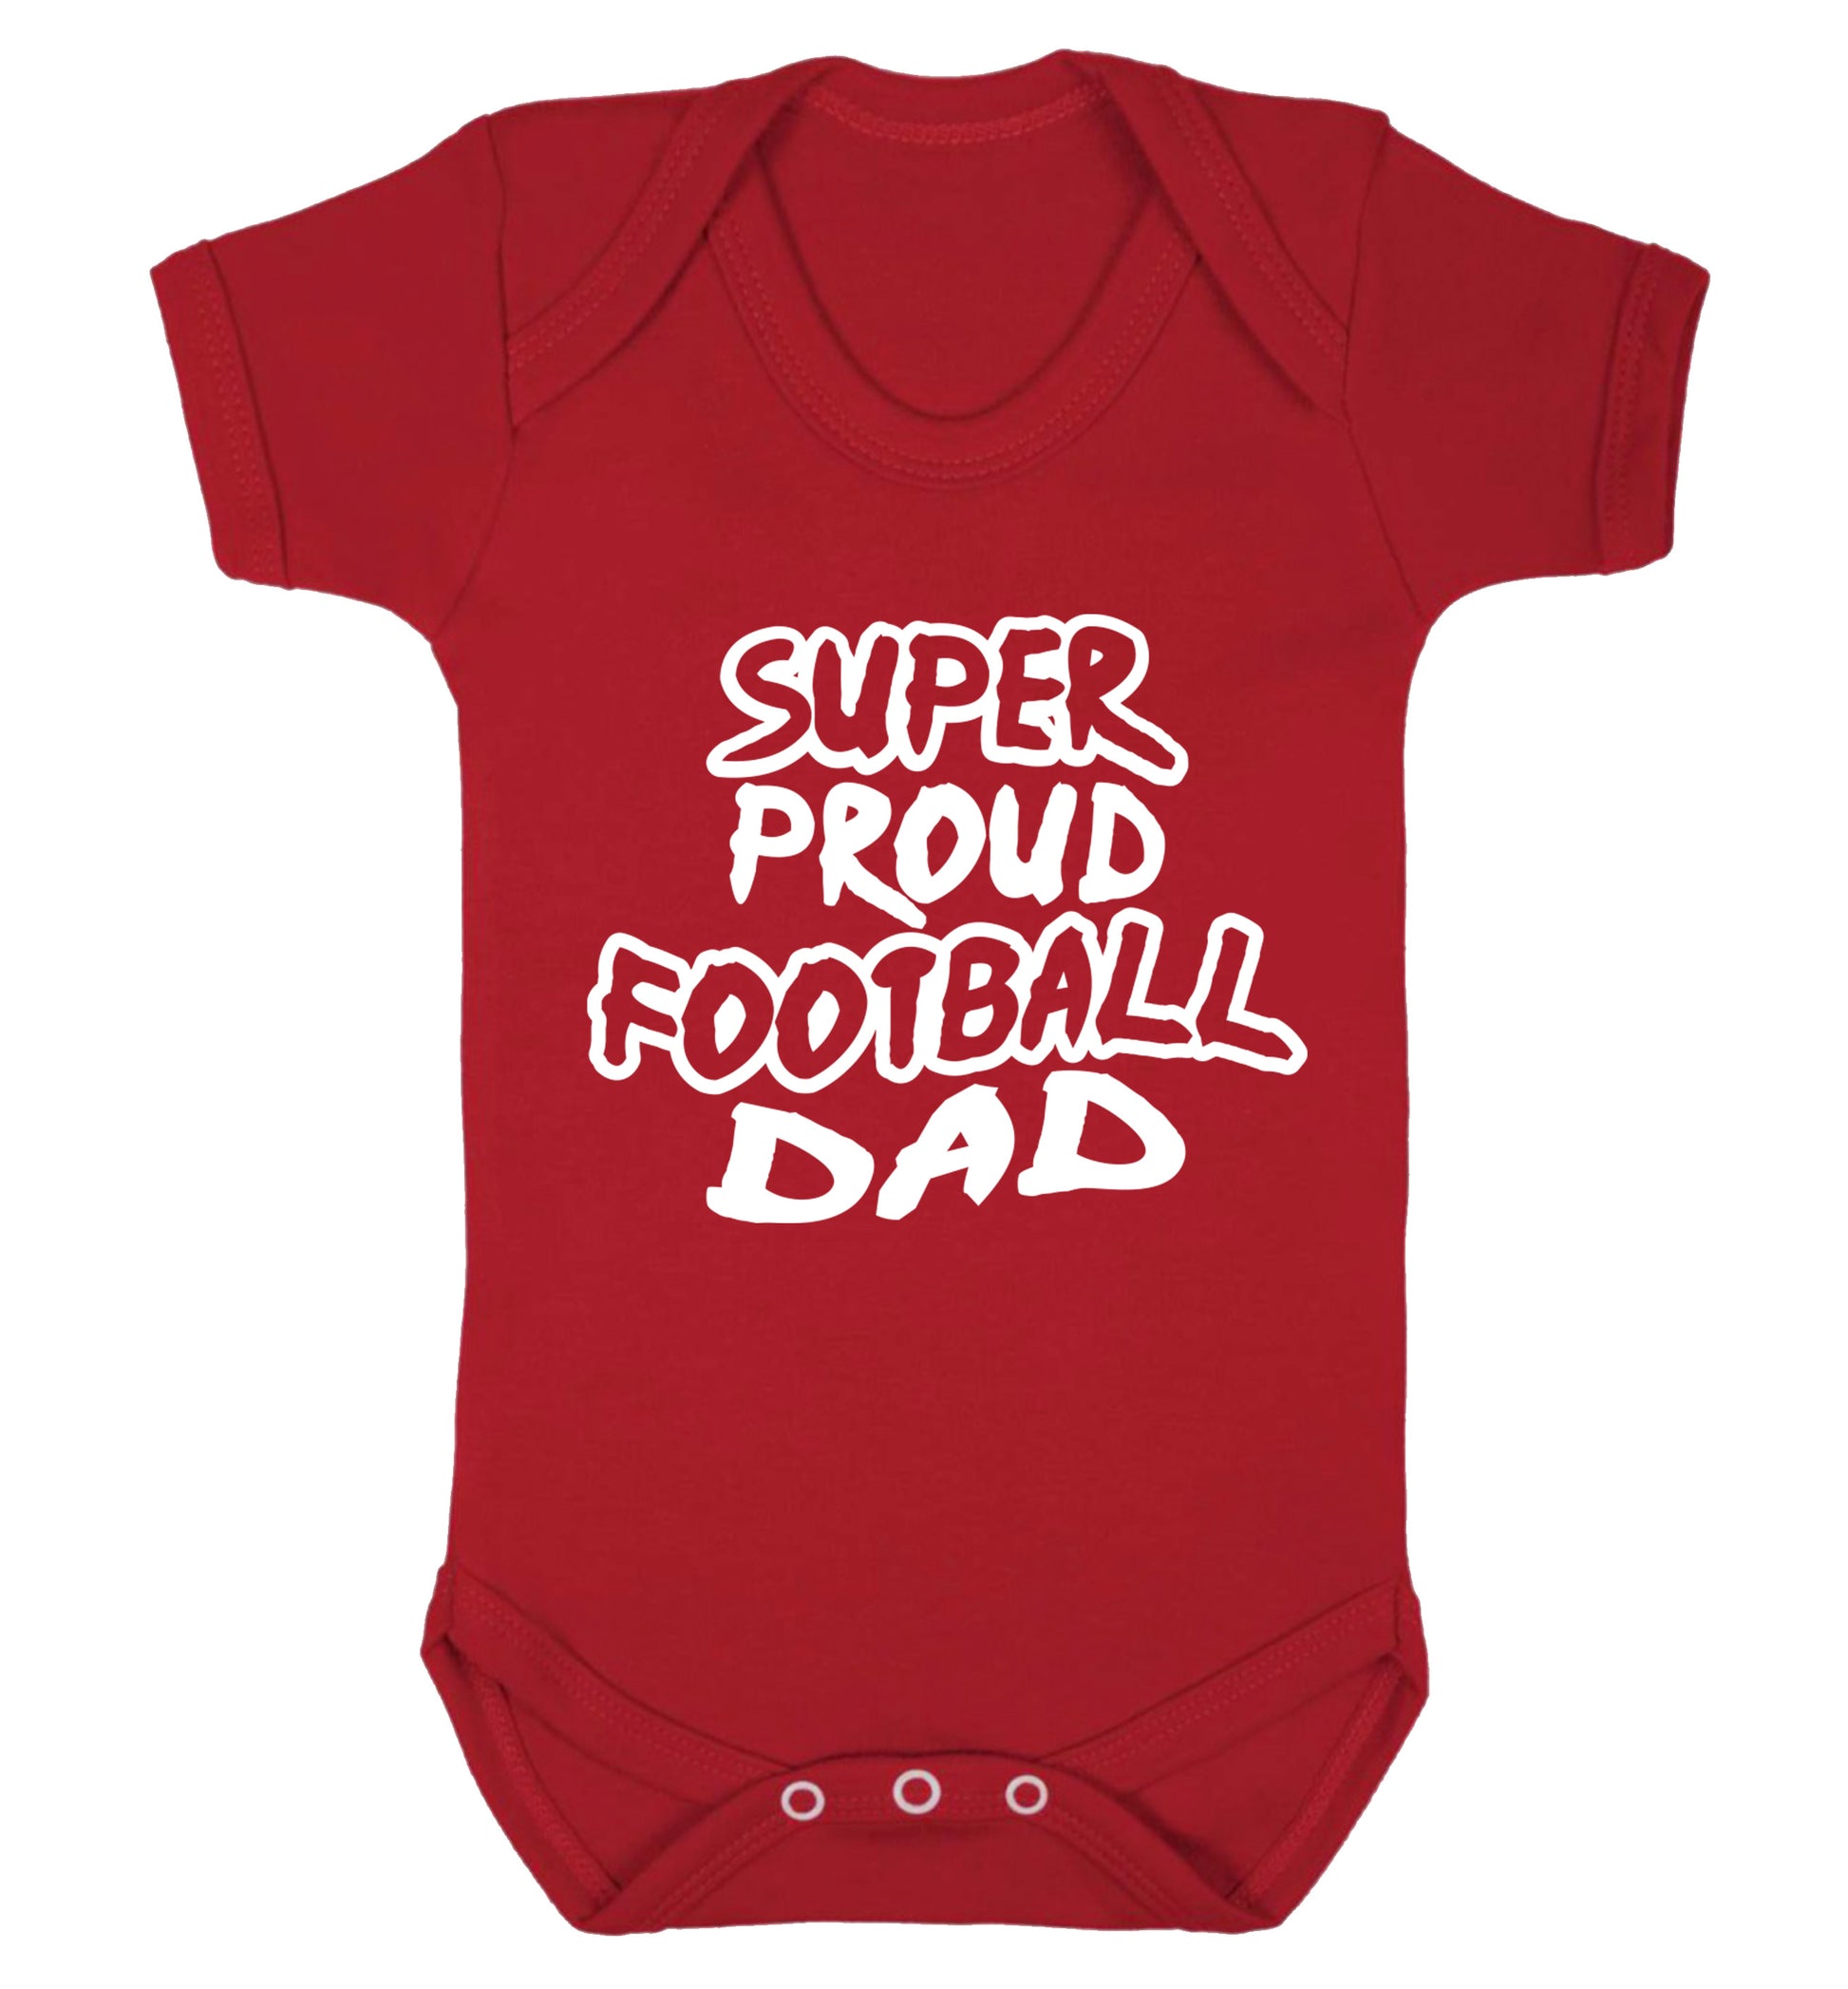 Super proud football dad Baby Vest red 18-24 months